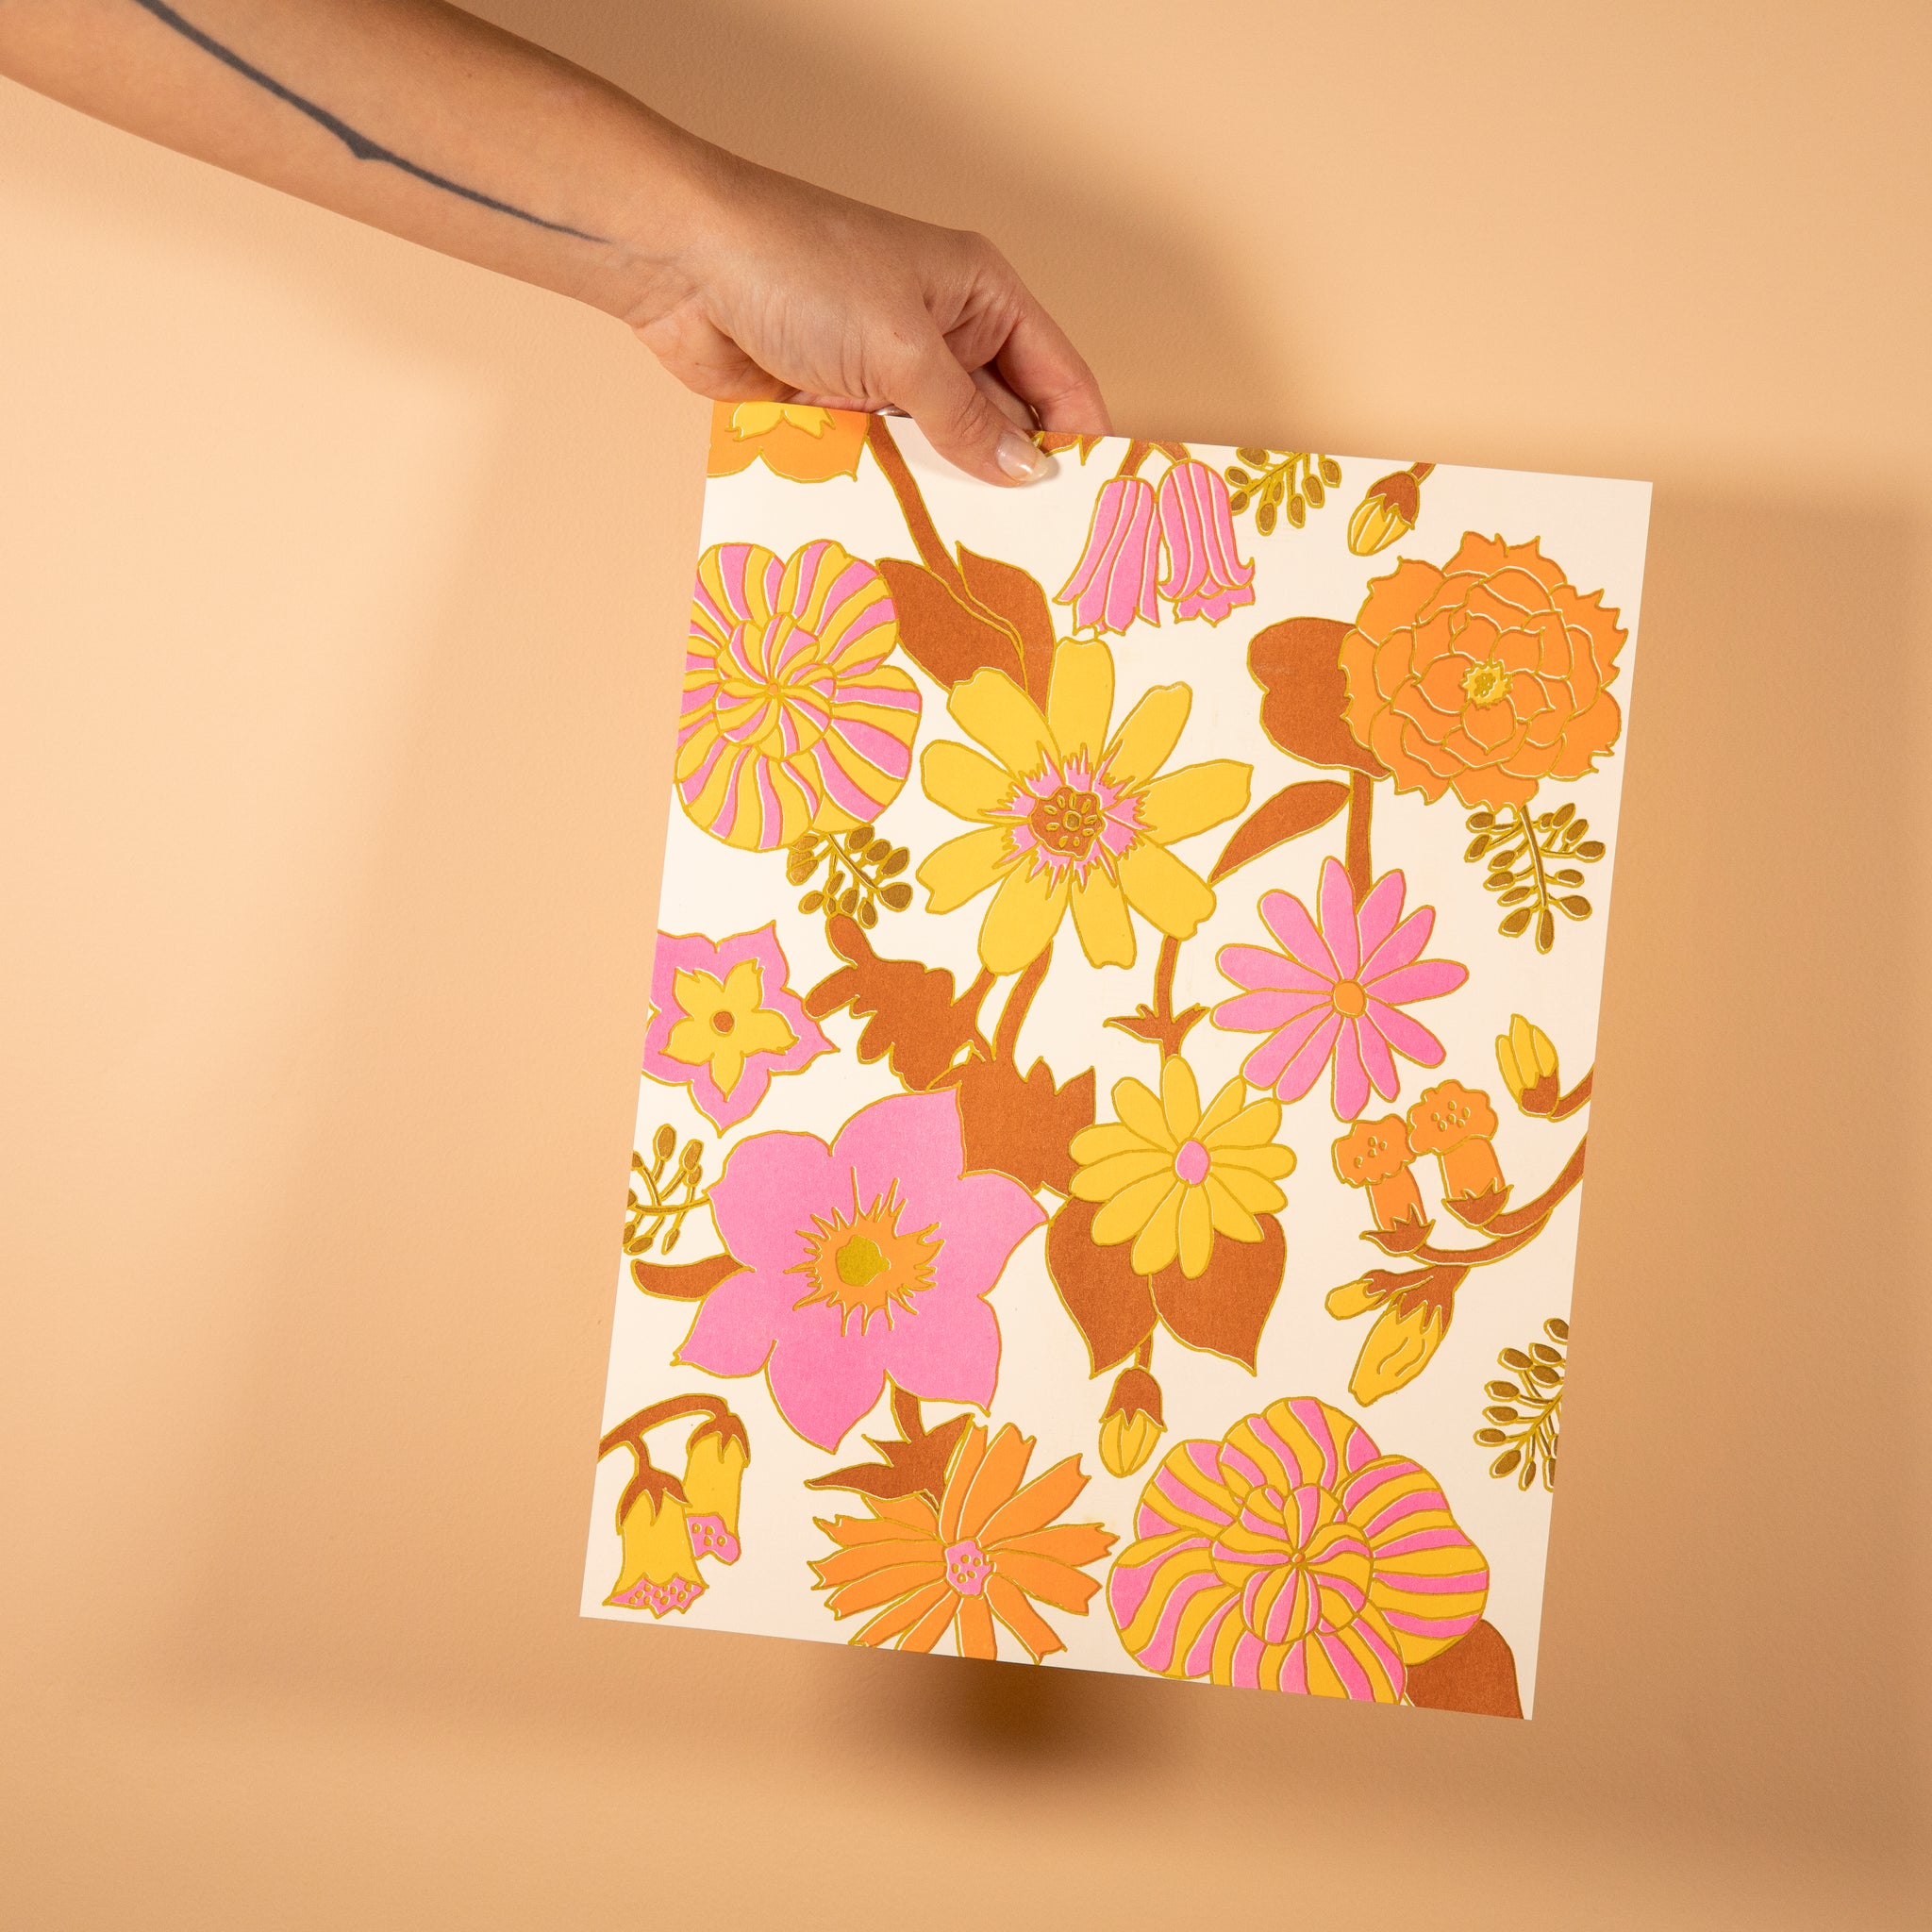 Floral Riso Print by Kelty Lewis